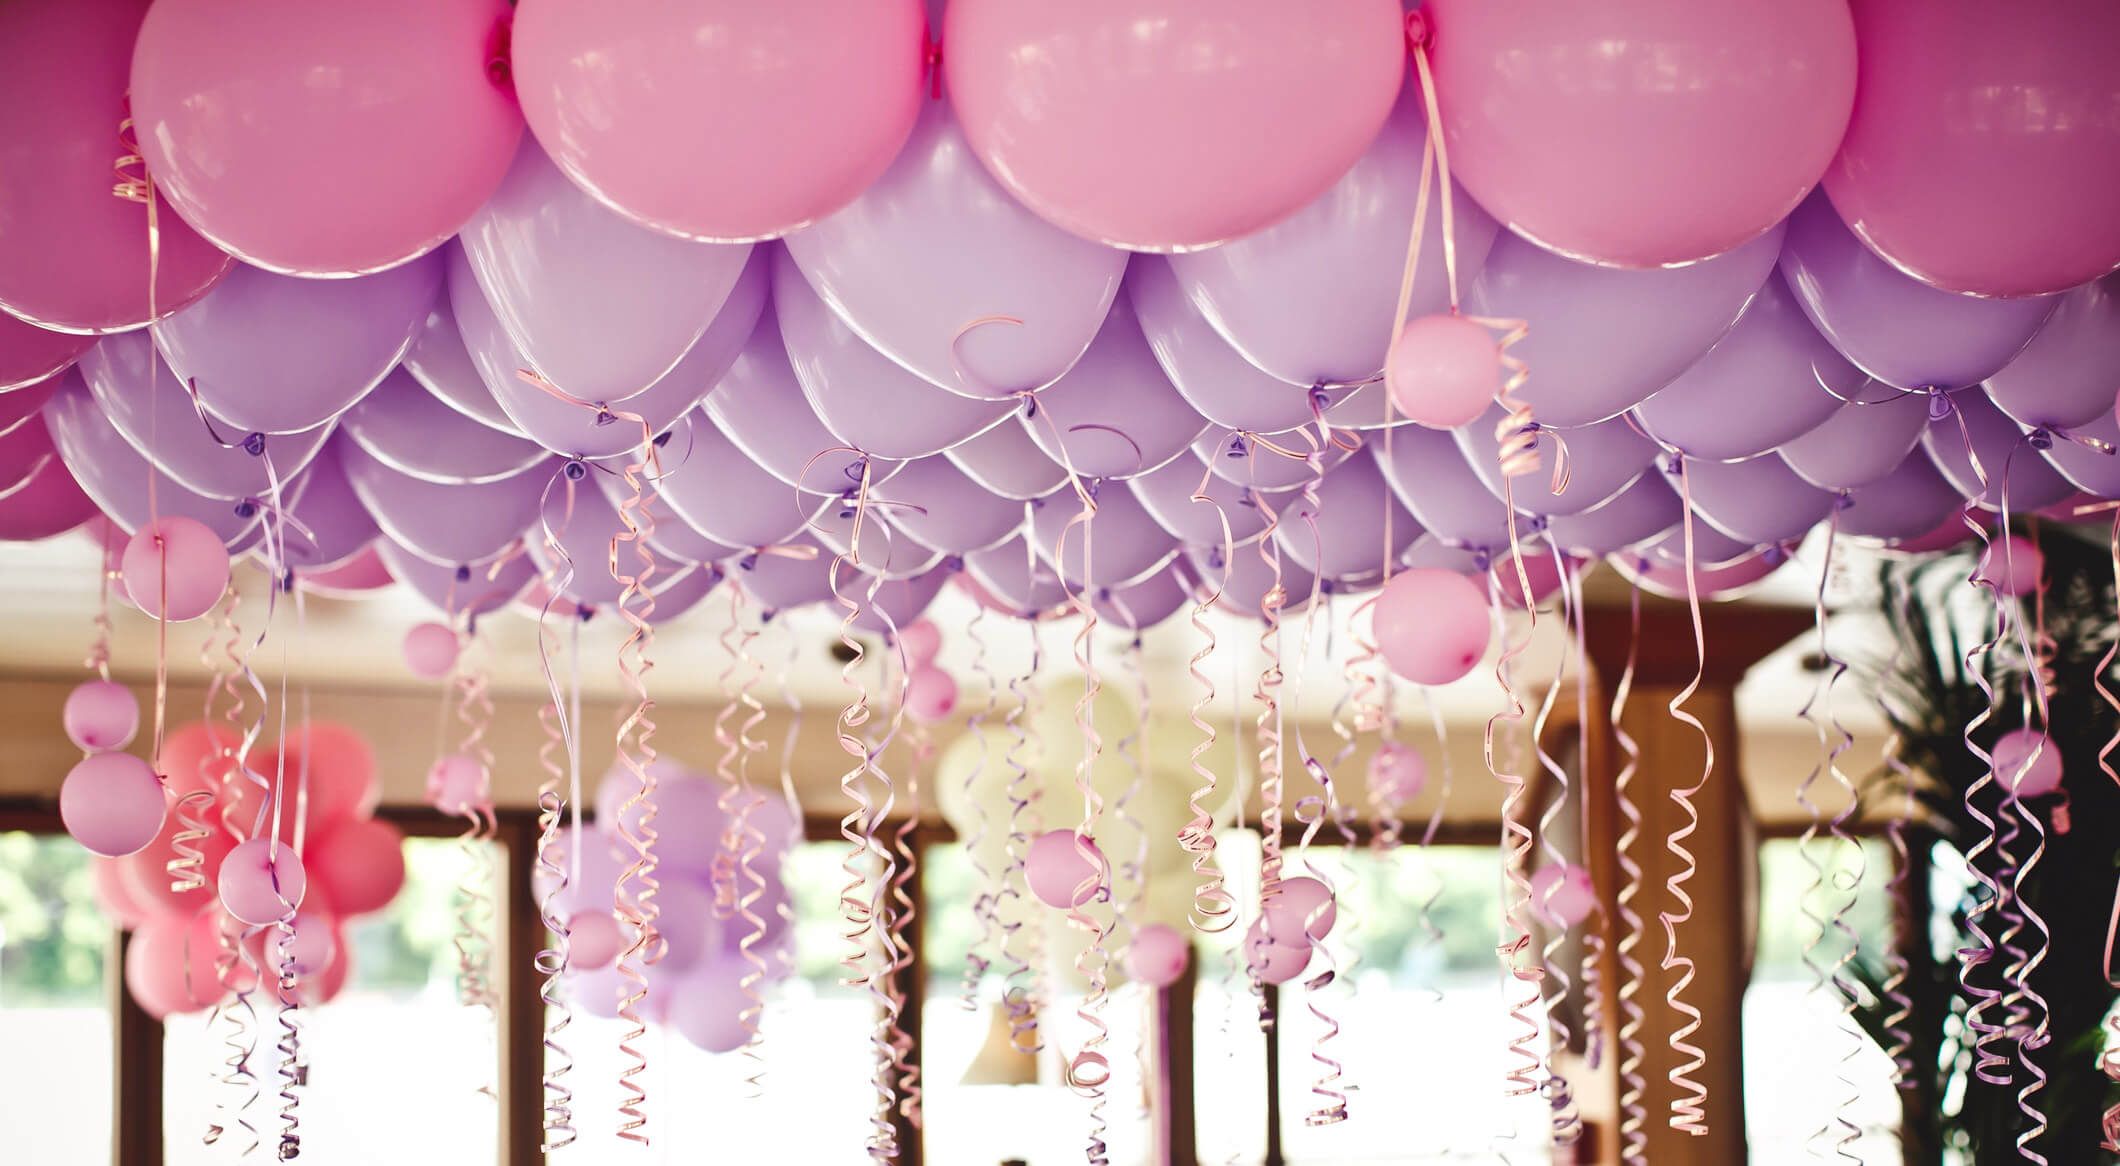 8 Easy DIY Party Decoration Ideas - Creative and Appealing BBCrafts.com